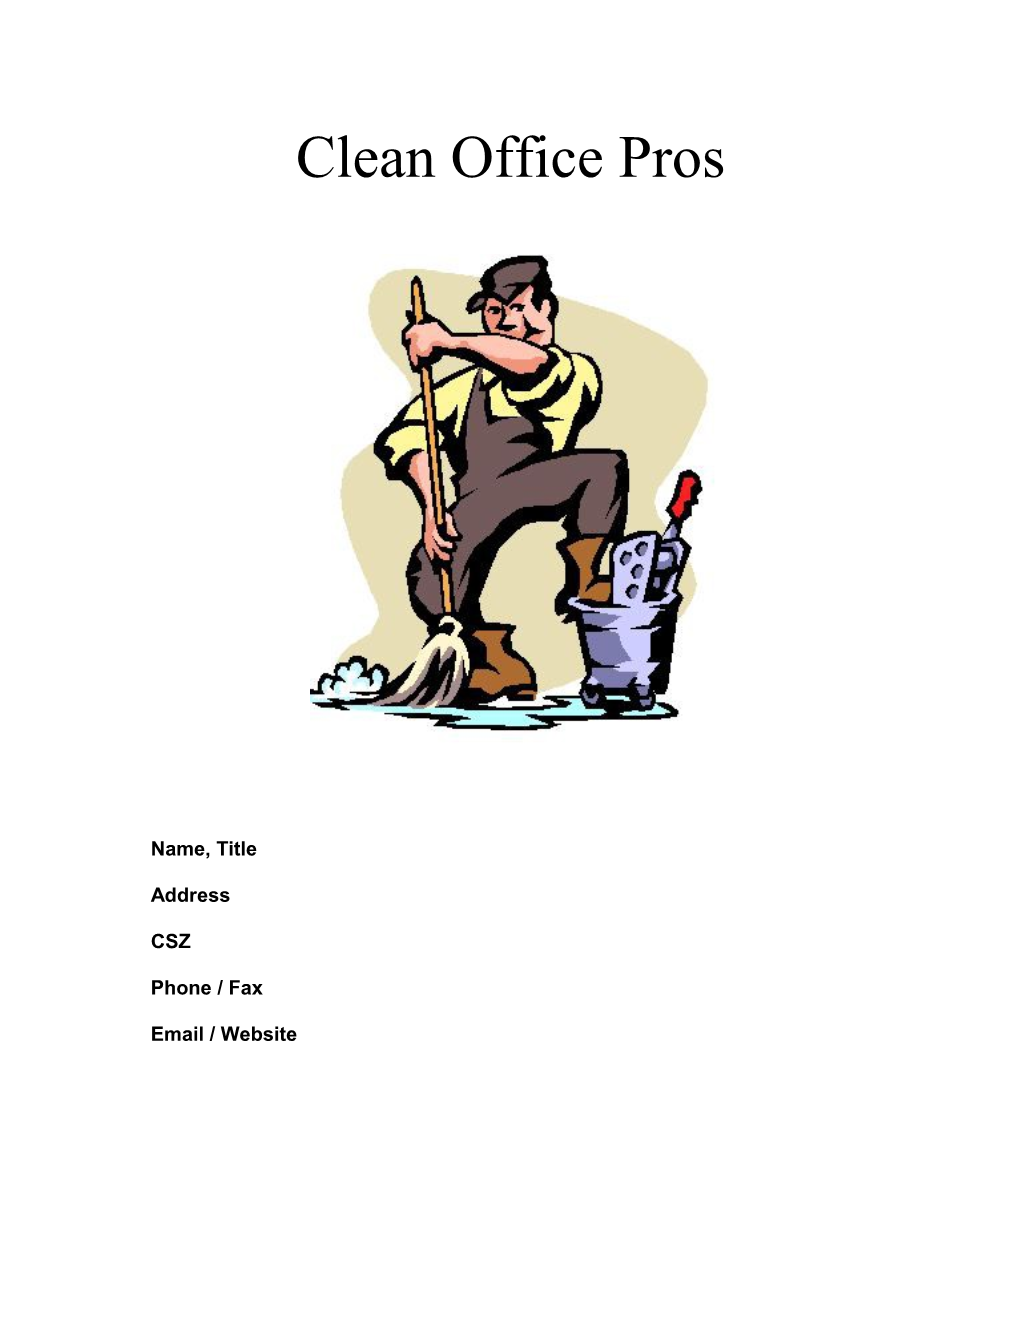 Clean Office Pros